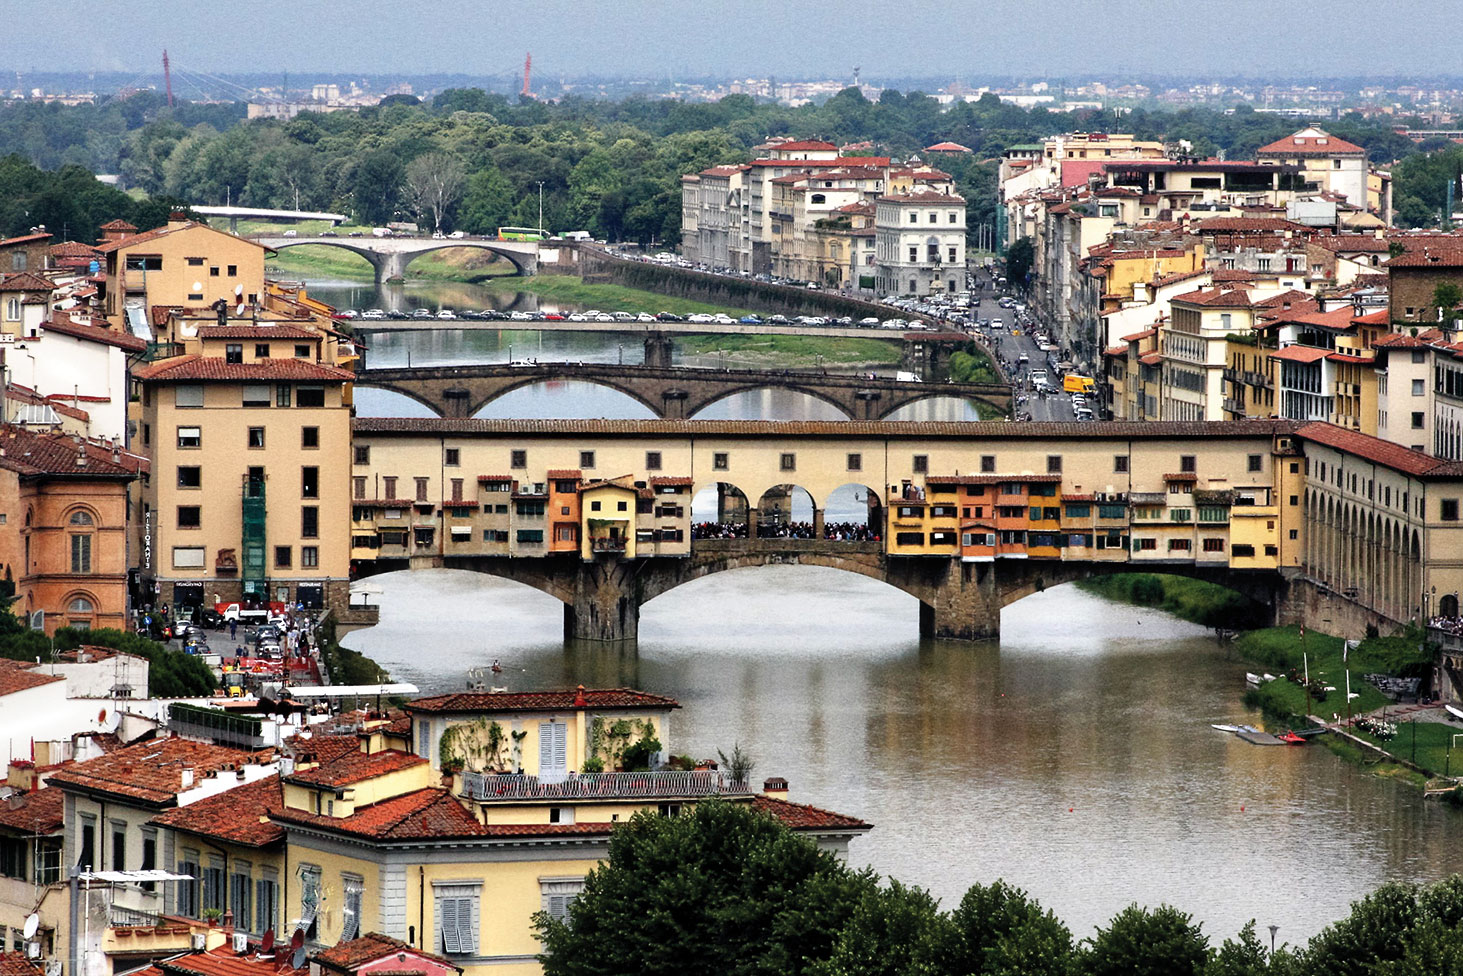 Third Place: Mike Turner - Bridges Over the Arno River